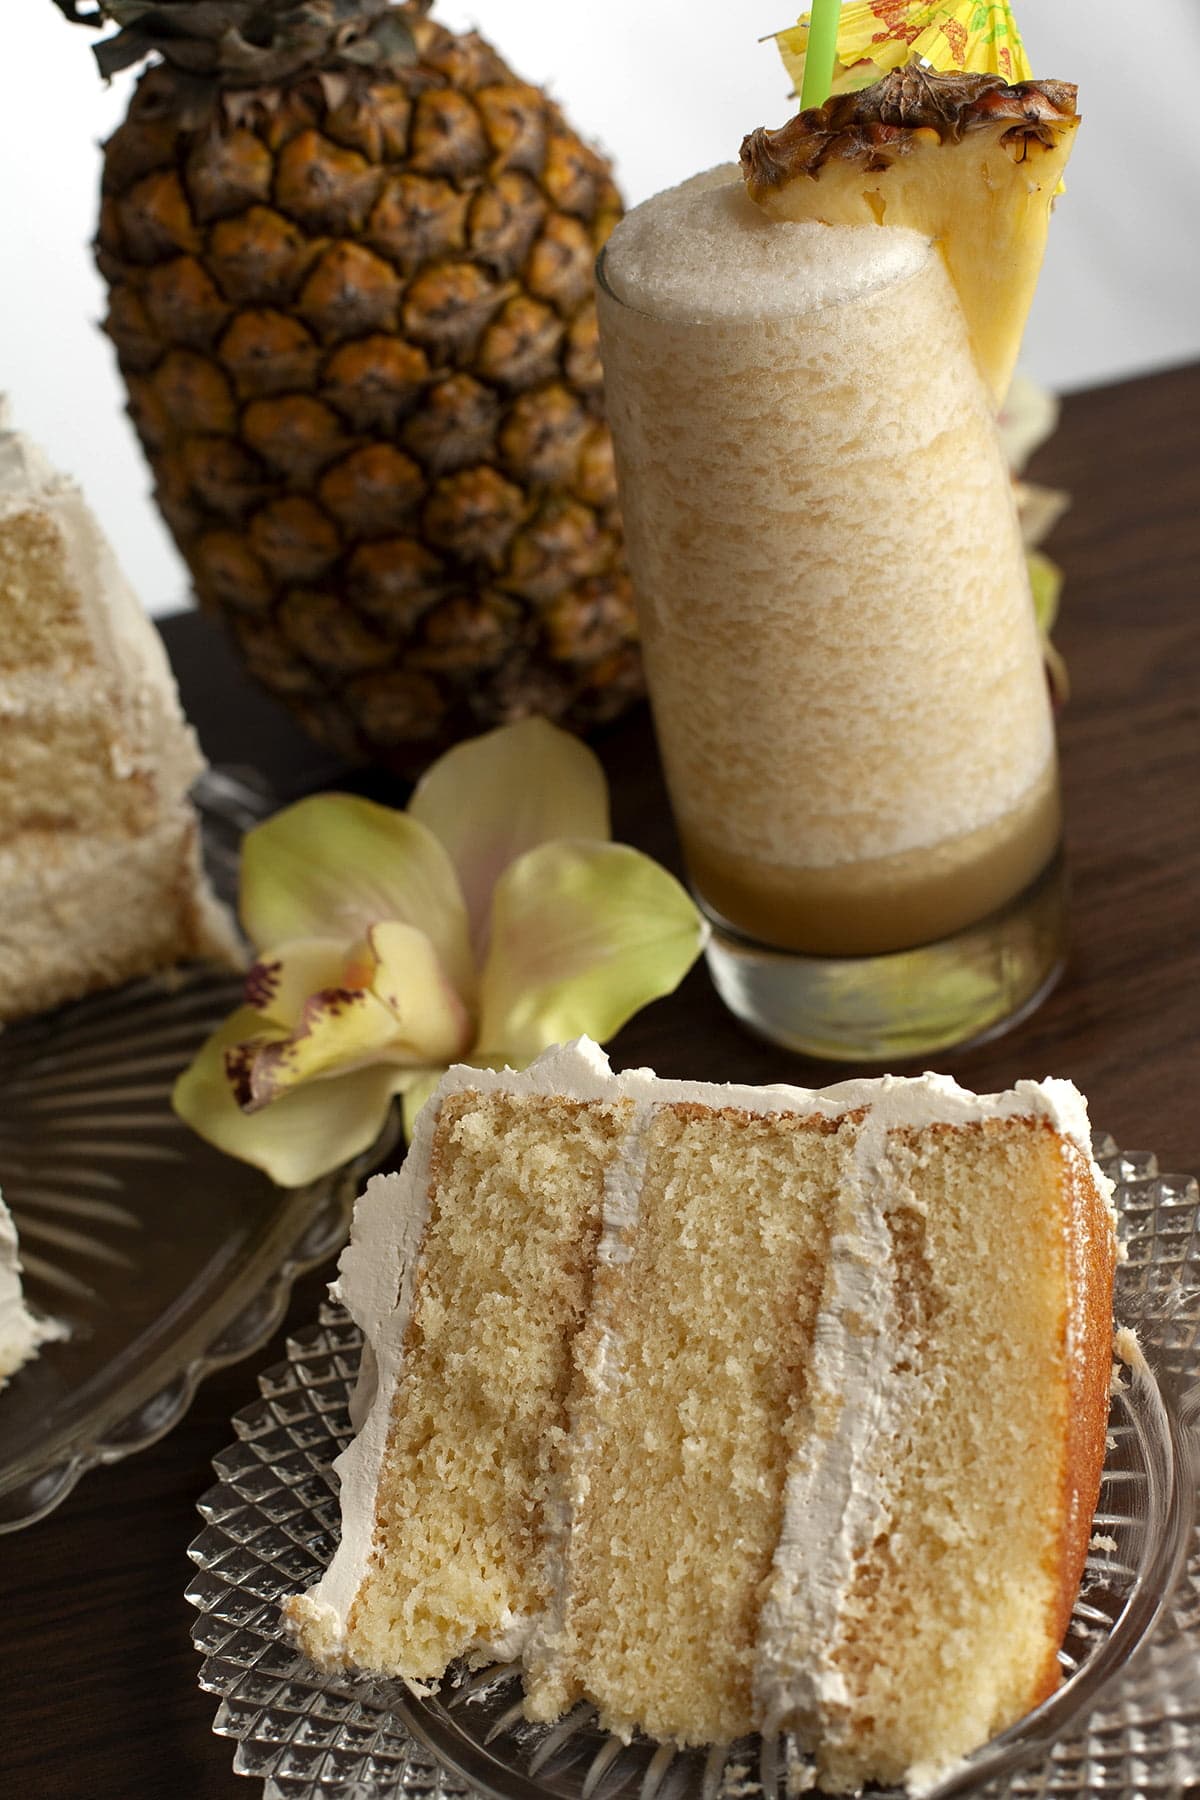 A slice of Bahama Mama torte is shown next to the cake it is cut from. 3 layers of a white cake, filled and frosted with a white frosting. A pimeapple, a yellow cymbidium orchid, and a tropical cocktail - a Bahama Mama - are shown next to and behind the cake.